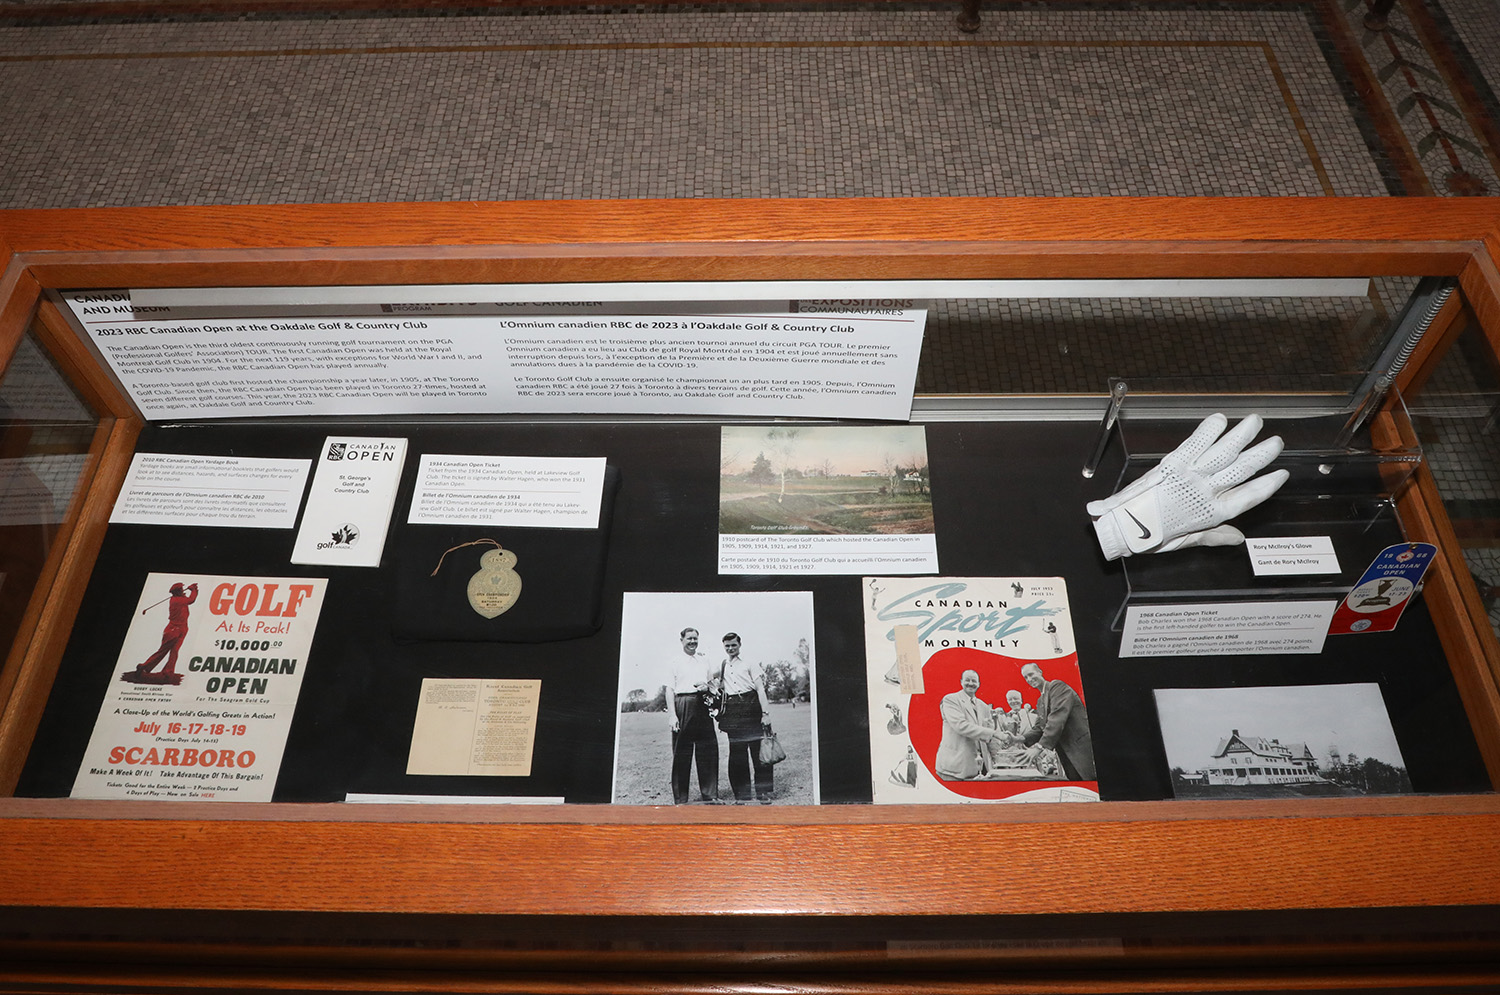 Picture of the Canadian Golf Hall of Fame and Museum exhibit